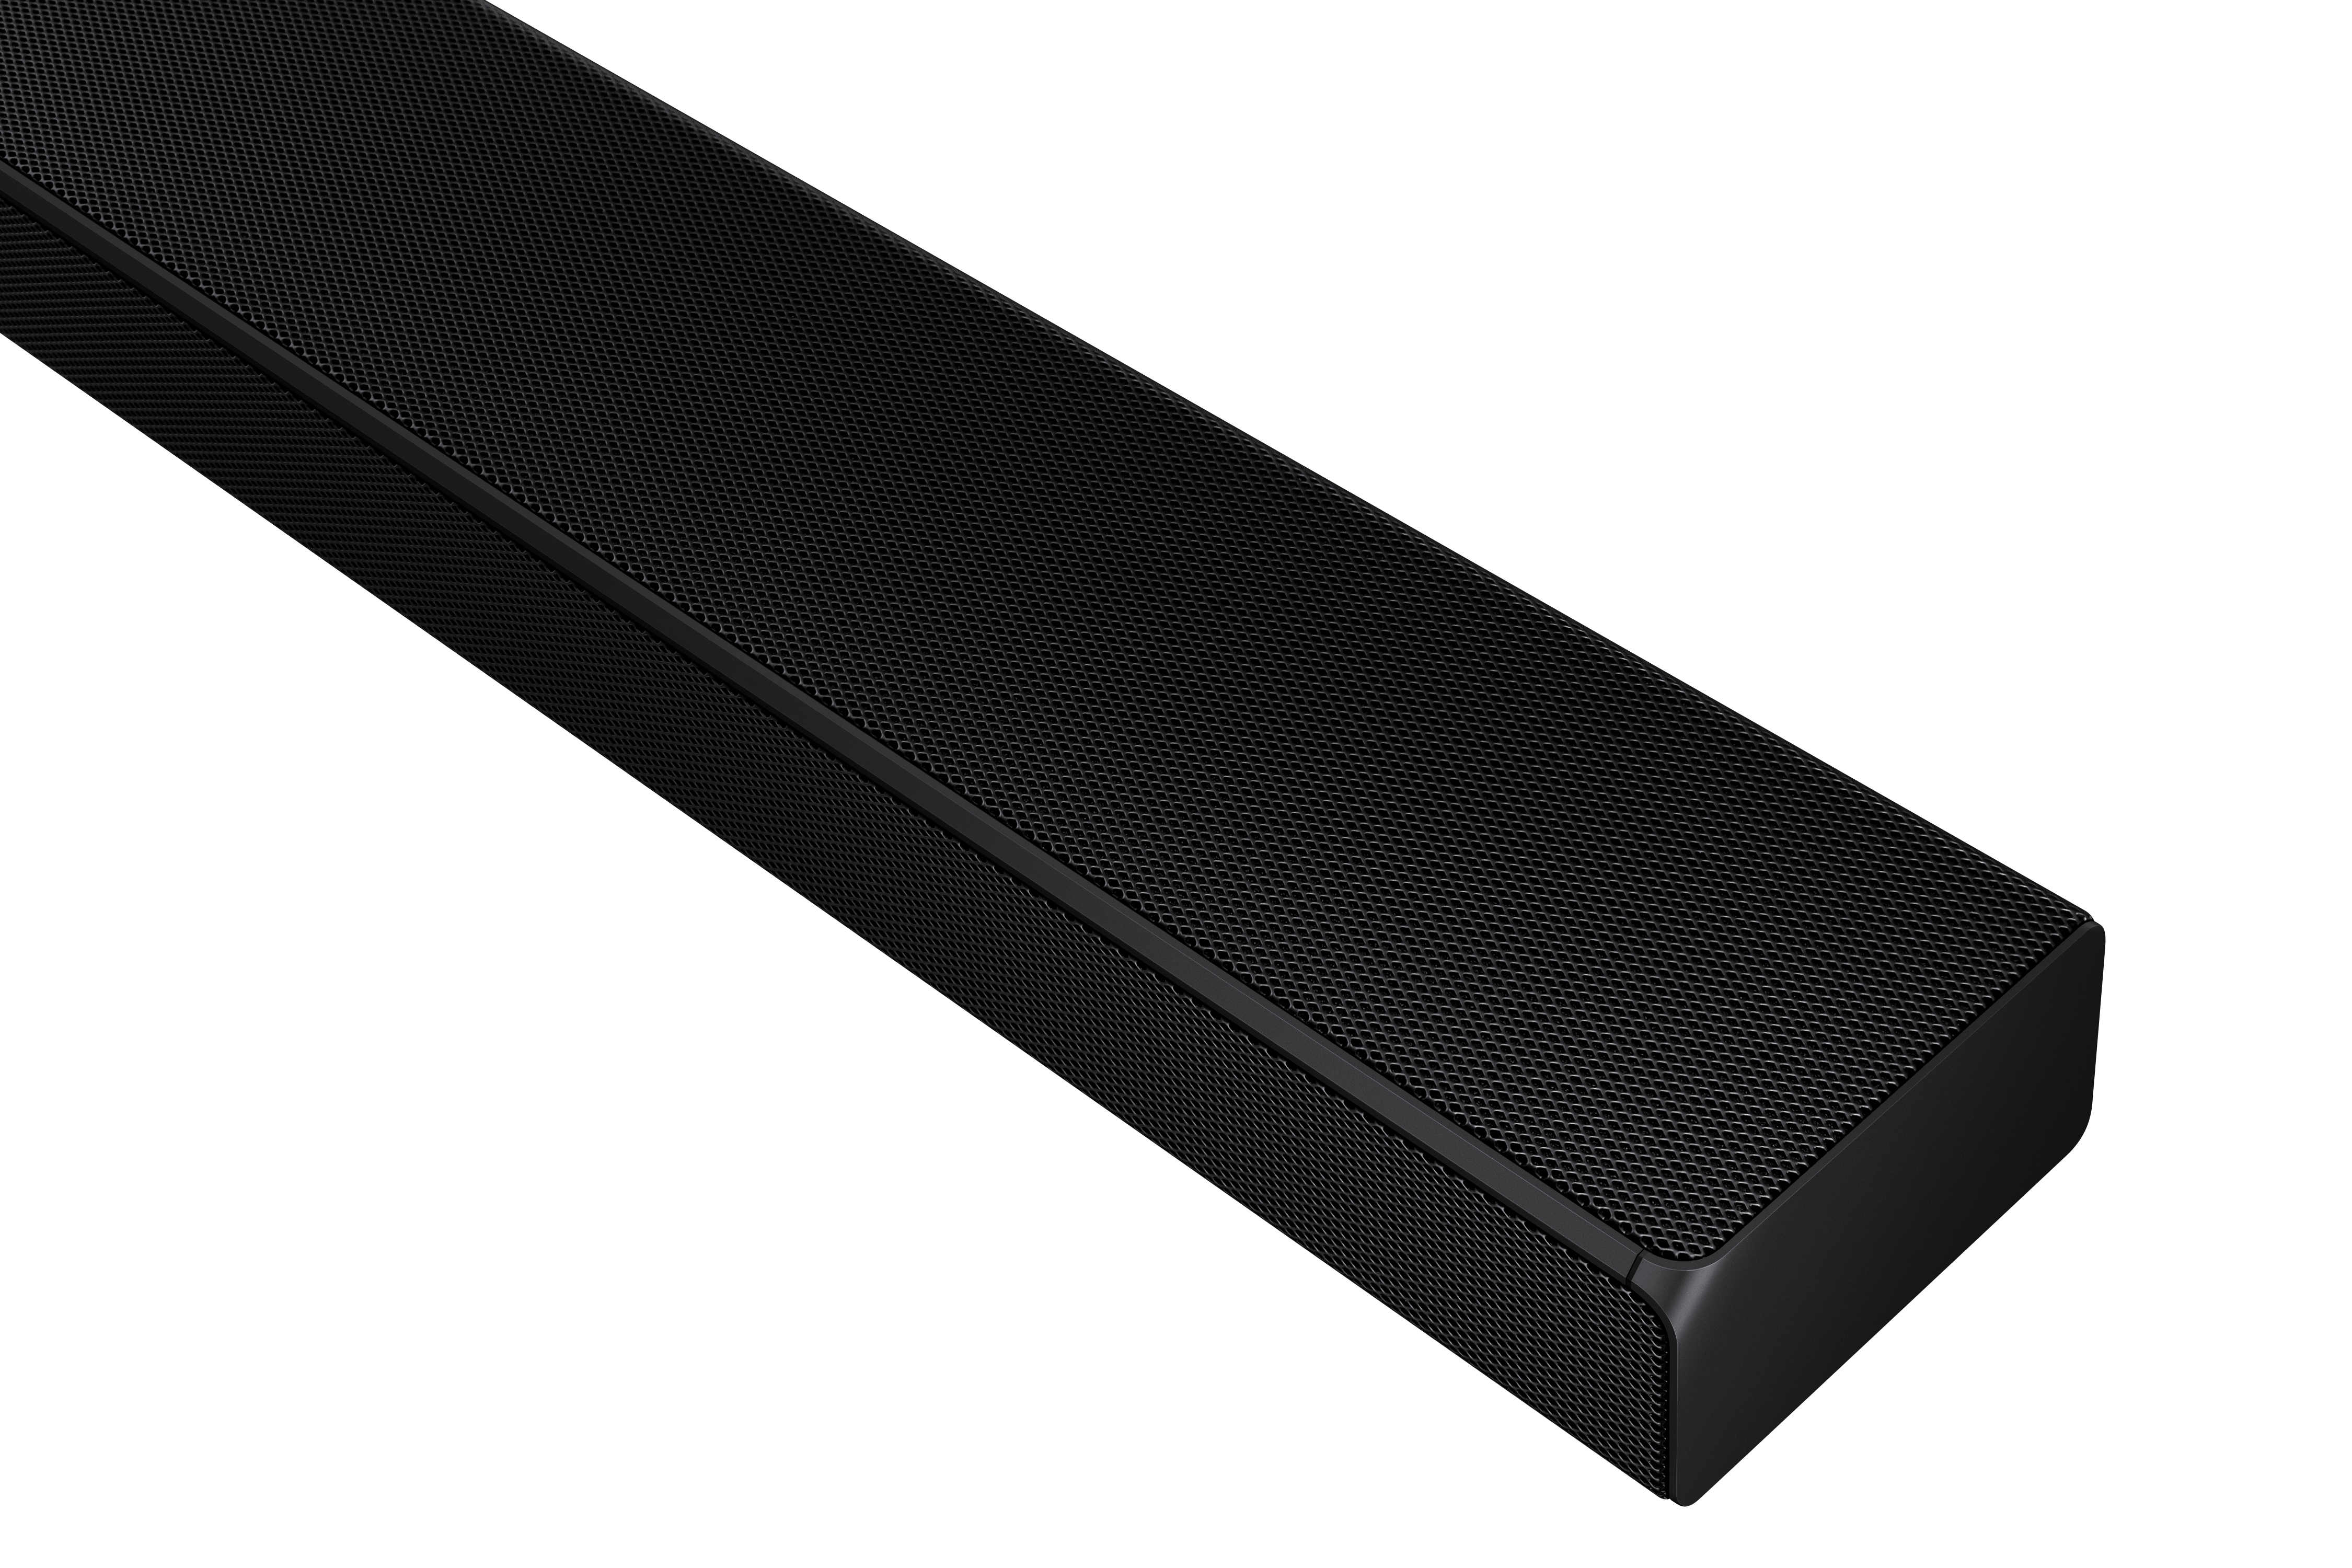 SAMSUNG HW-A650 3.1 Channel Soundbar with Wireless Subwoofer and Dolby 5.1 / DTS Virtual:X - image 4 of 8